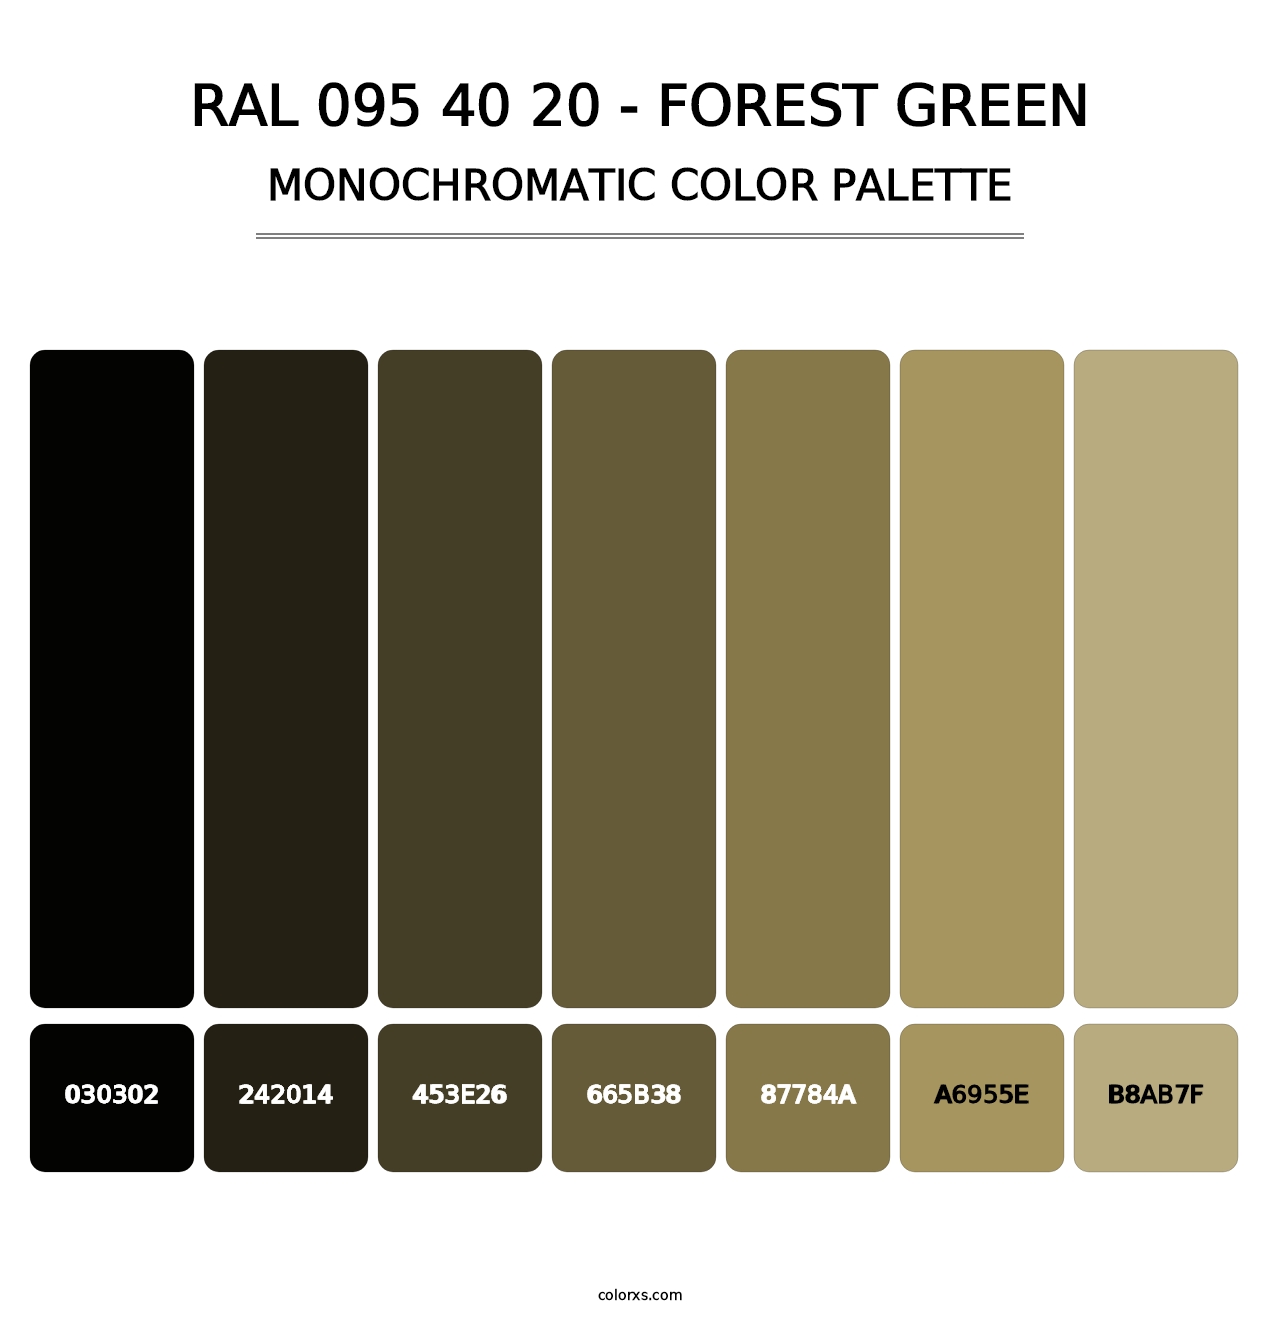 RAL 095 40 20 - Forest Green - Monochromatic Color Palette